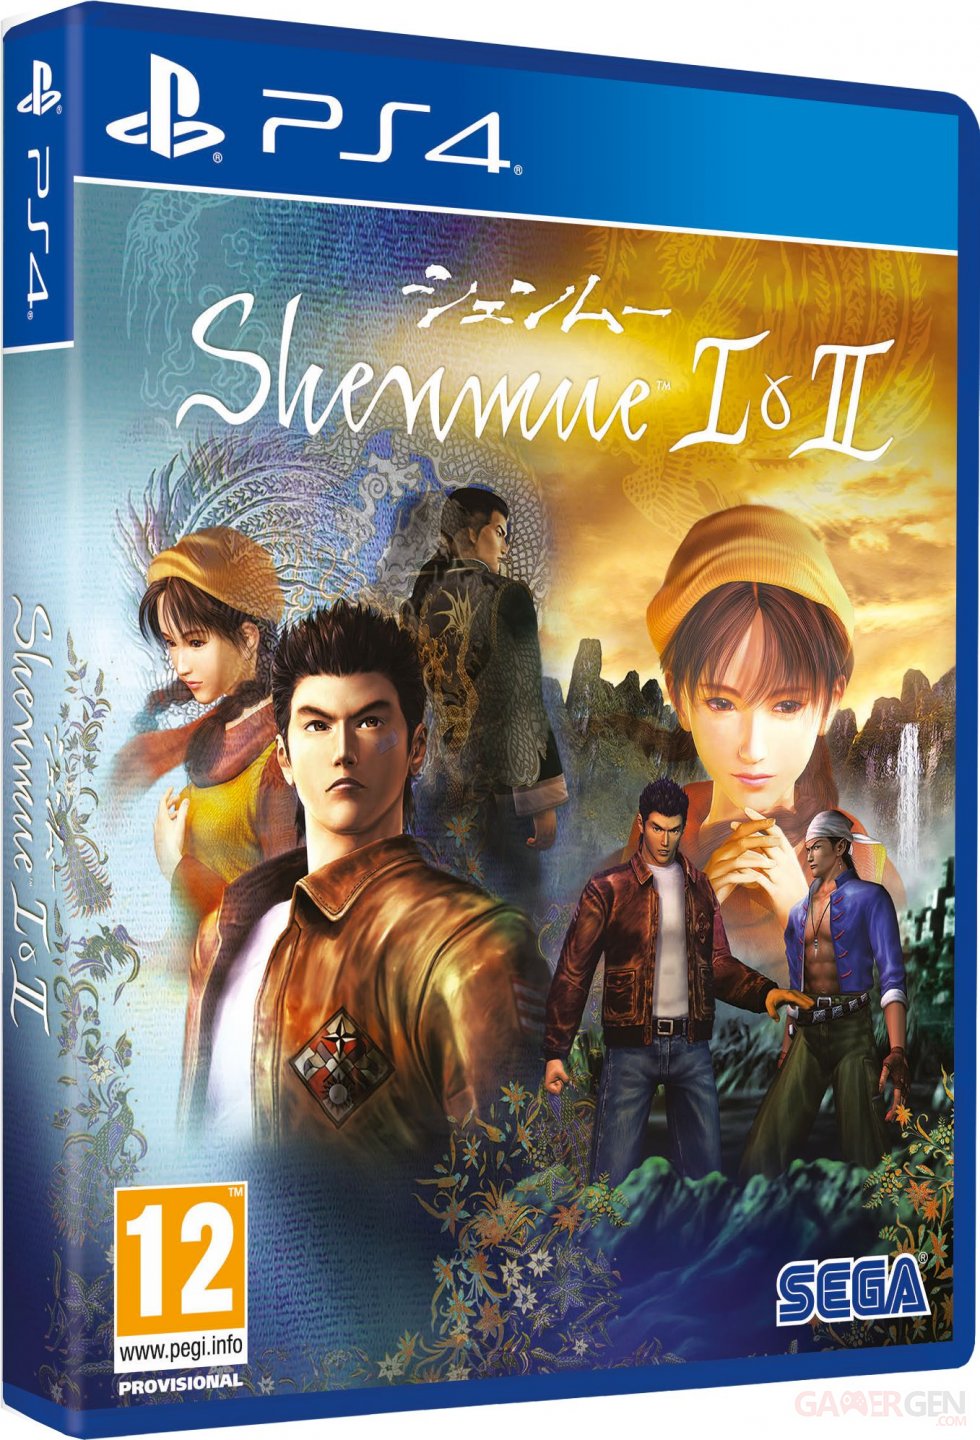 Shenmue-I-II-jaquette-PS4-bis-14-04-2018